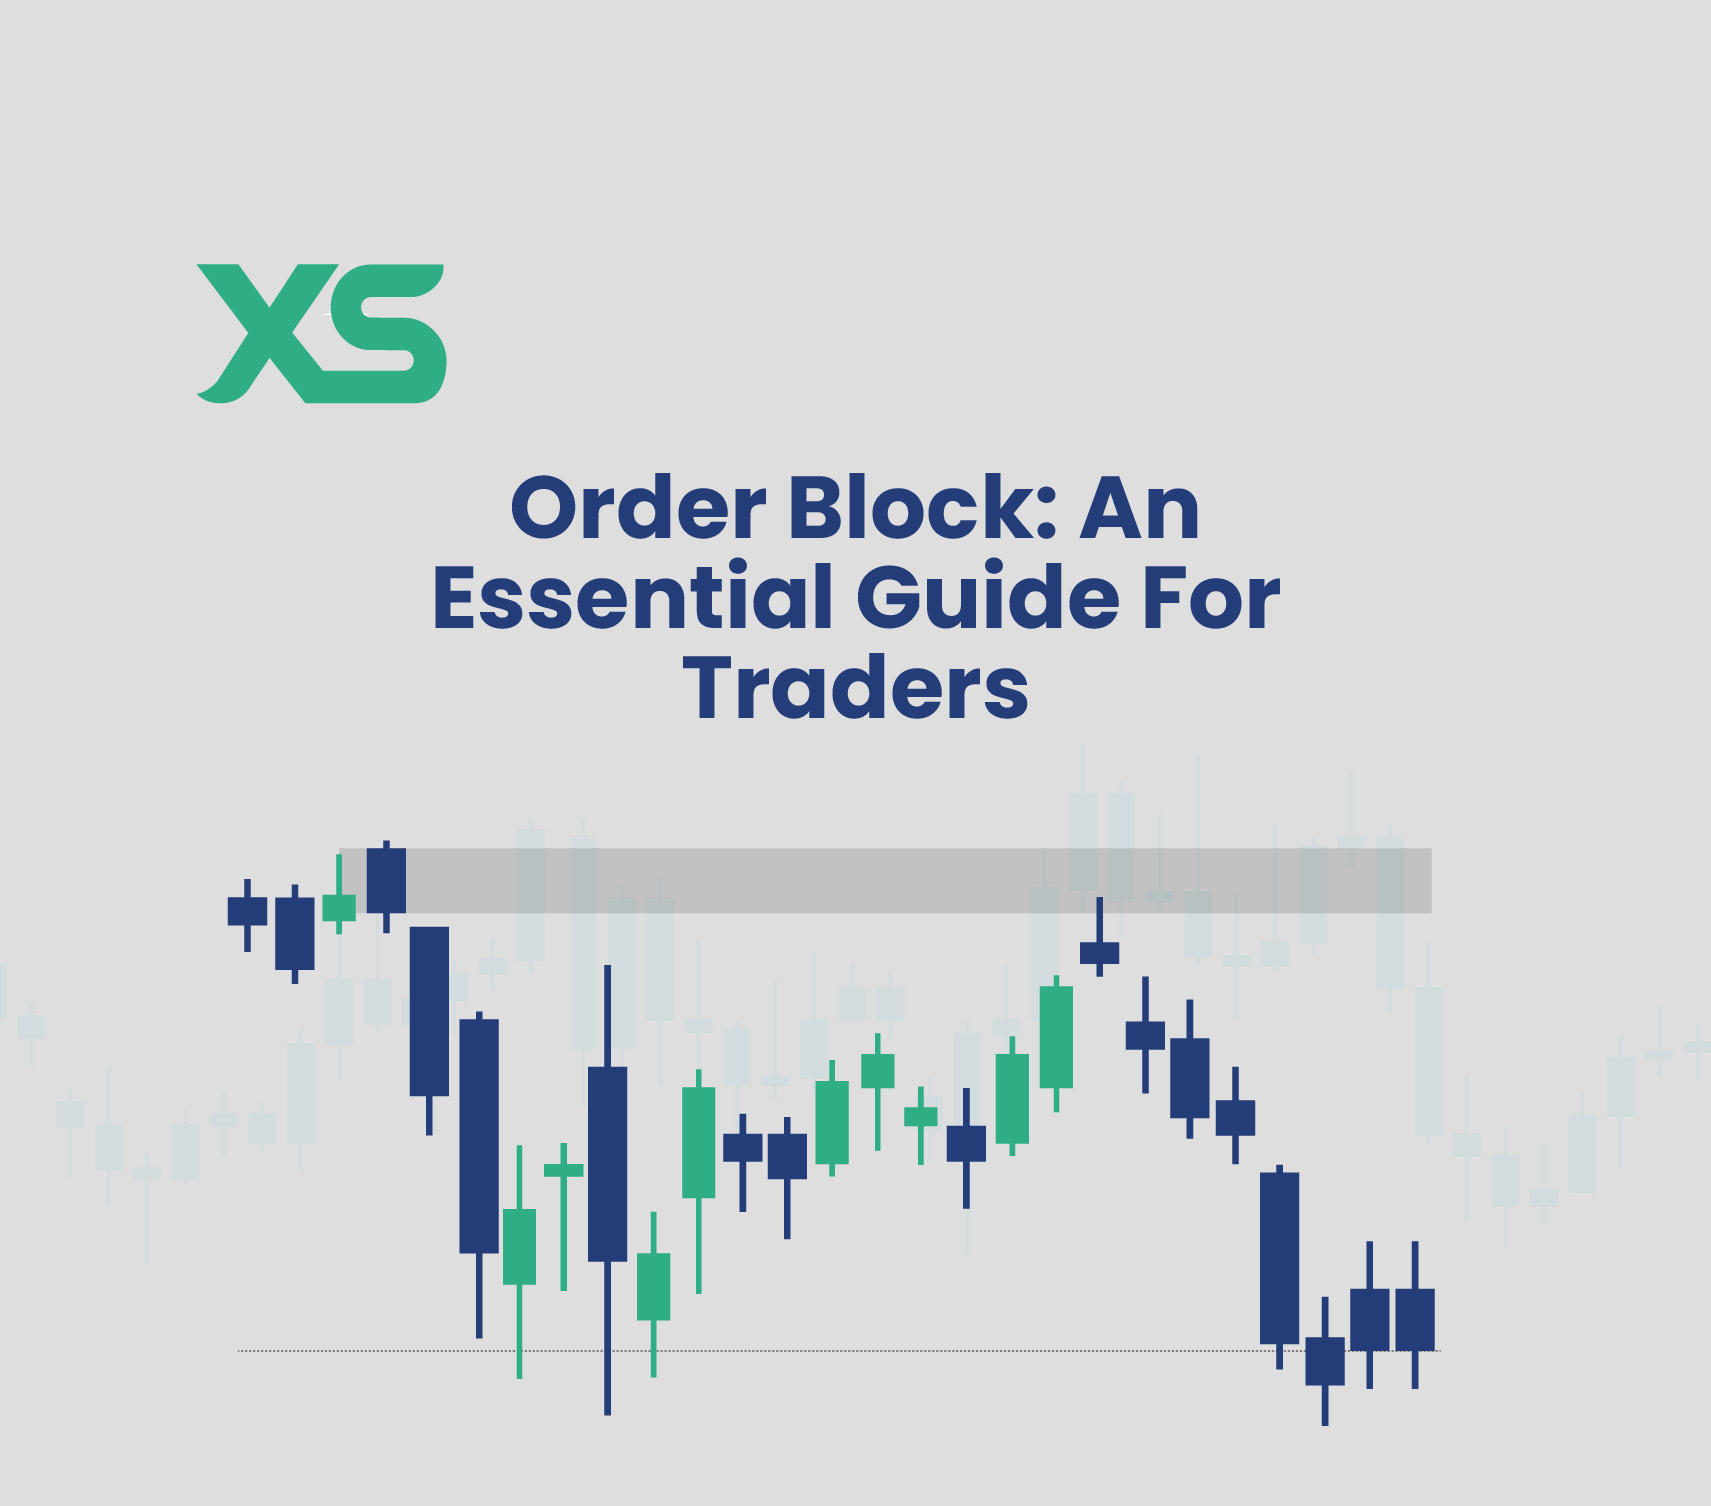 Order Block: An Essential Guide For Traders - XS